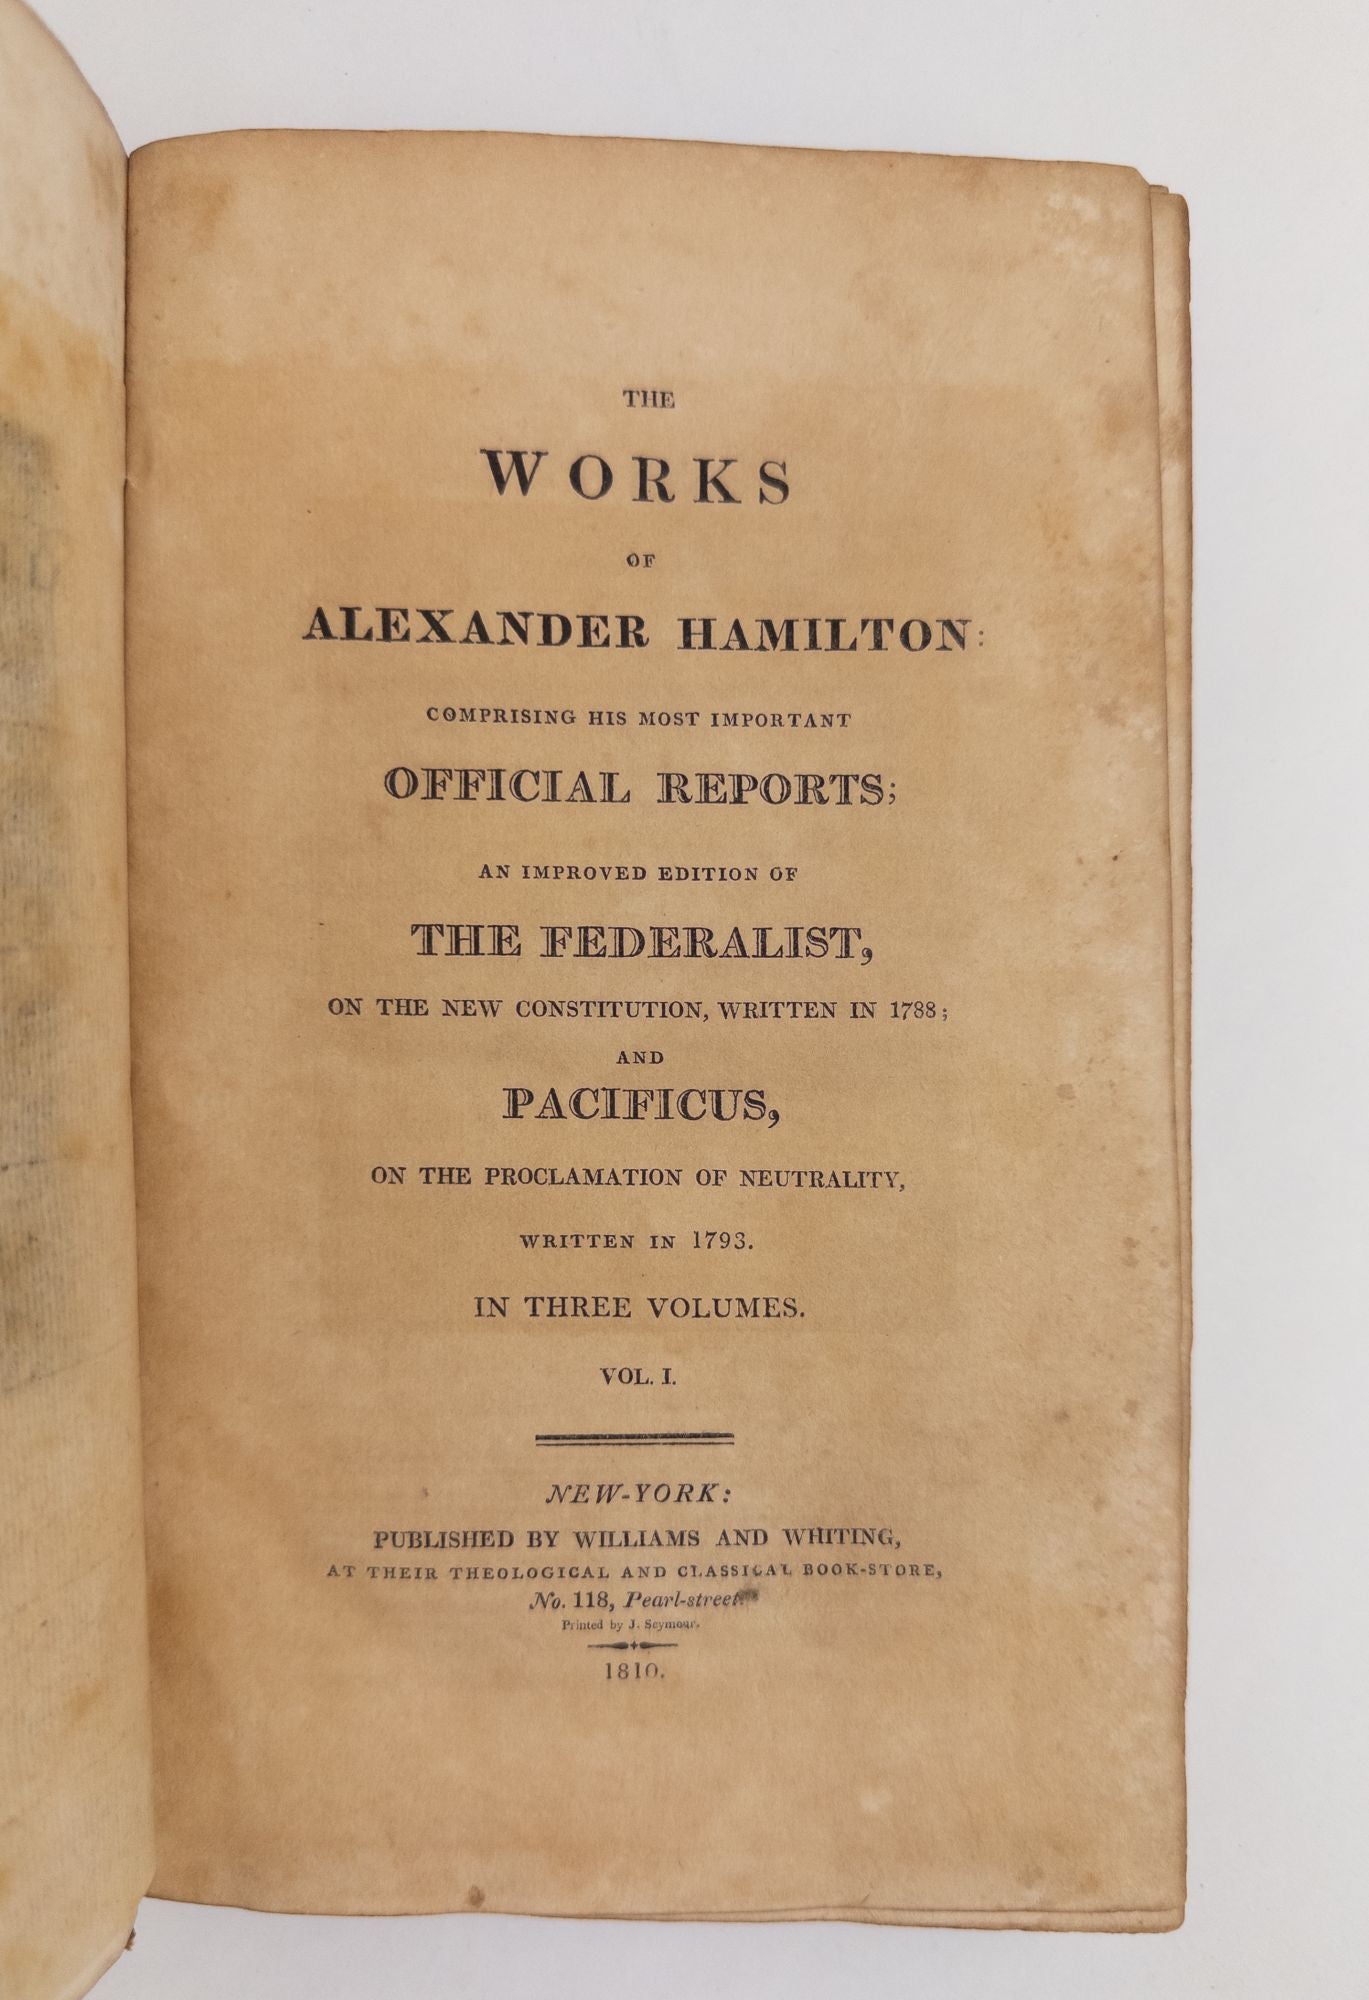 Product Image for THE WORKS OF ALEXANDER HAMILTON [VOLUME ONE ONLY]